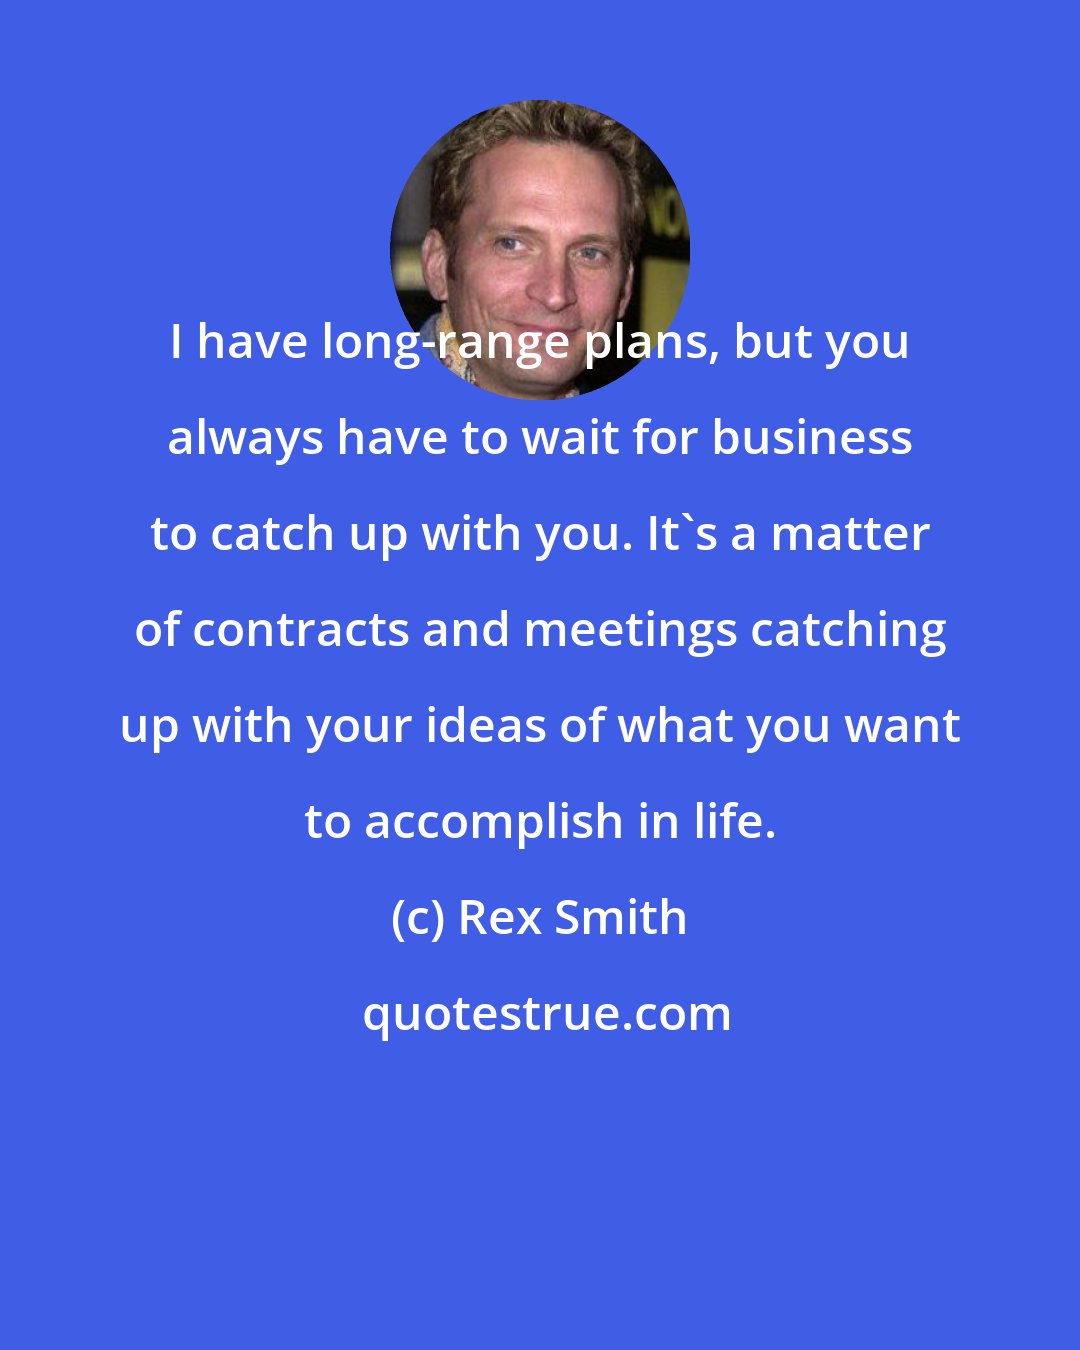 Rex Smith: I have long-range plans, but you always have to wait for business to catch up with you. It's a matter of contracts and meetings catching up with your ideas of what you want to accomplish in life.